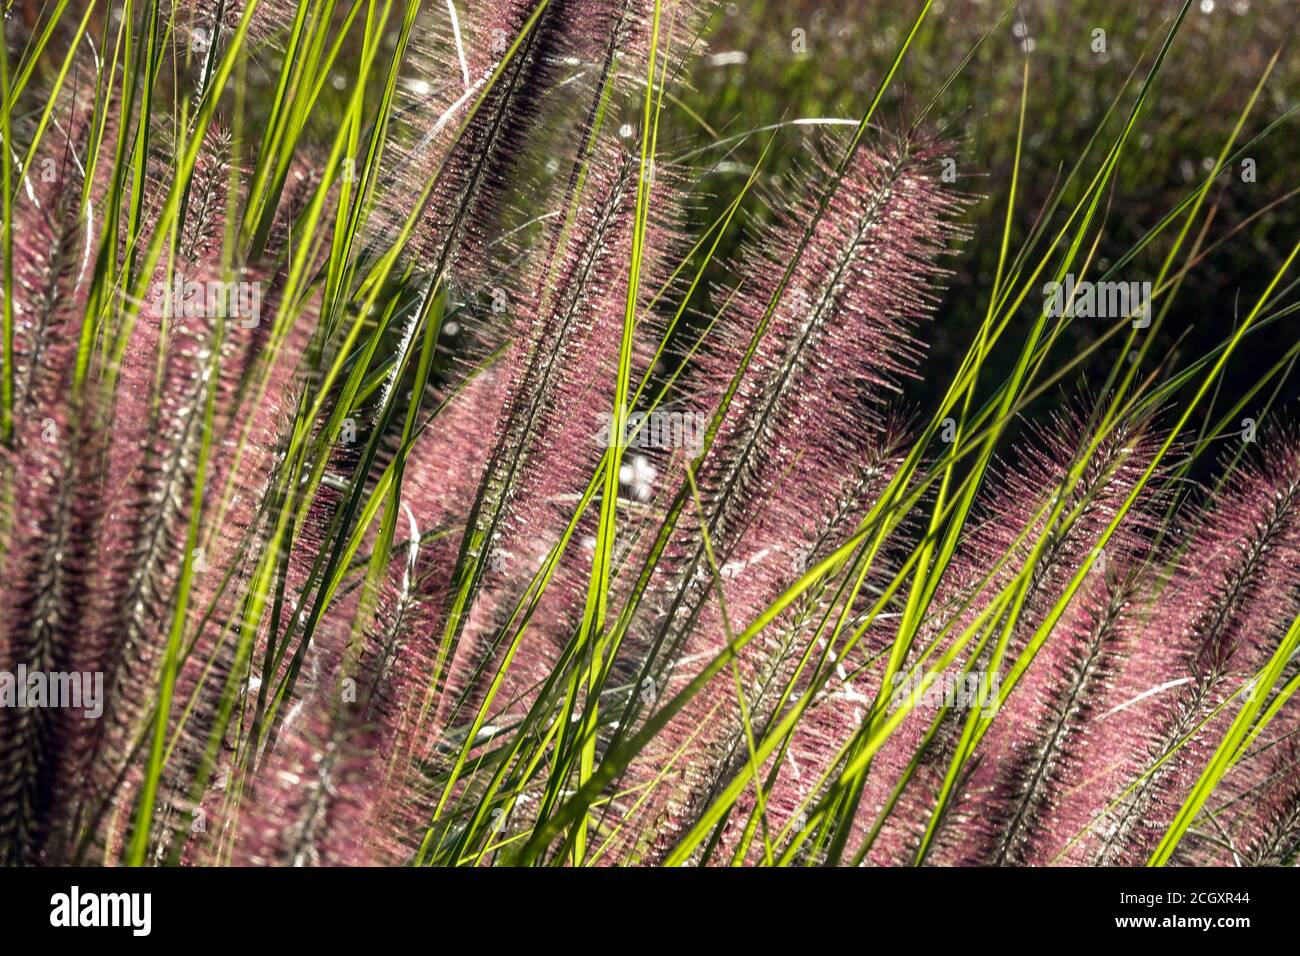 September flowers Fountain Grass Pennisetum alopecuroides Red Head ornamental grasses Stock Photo